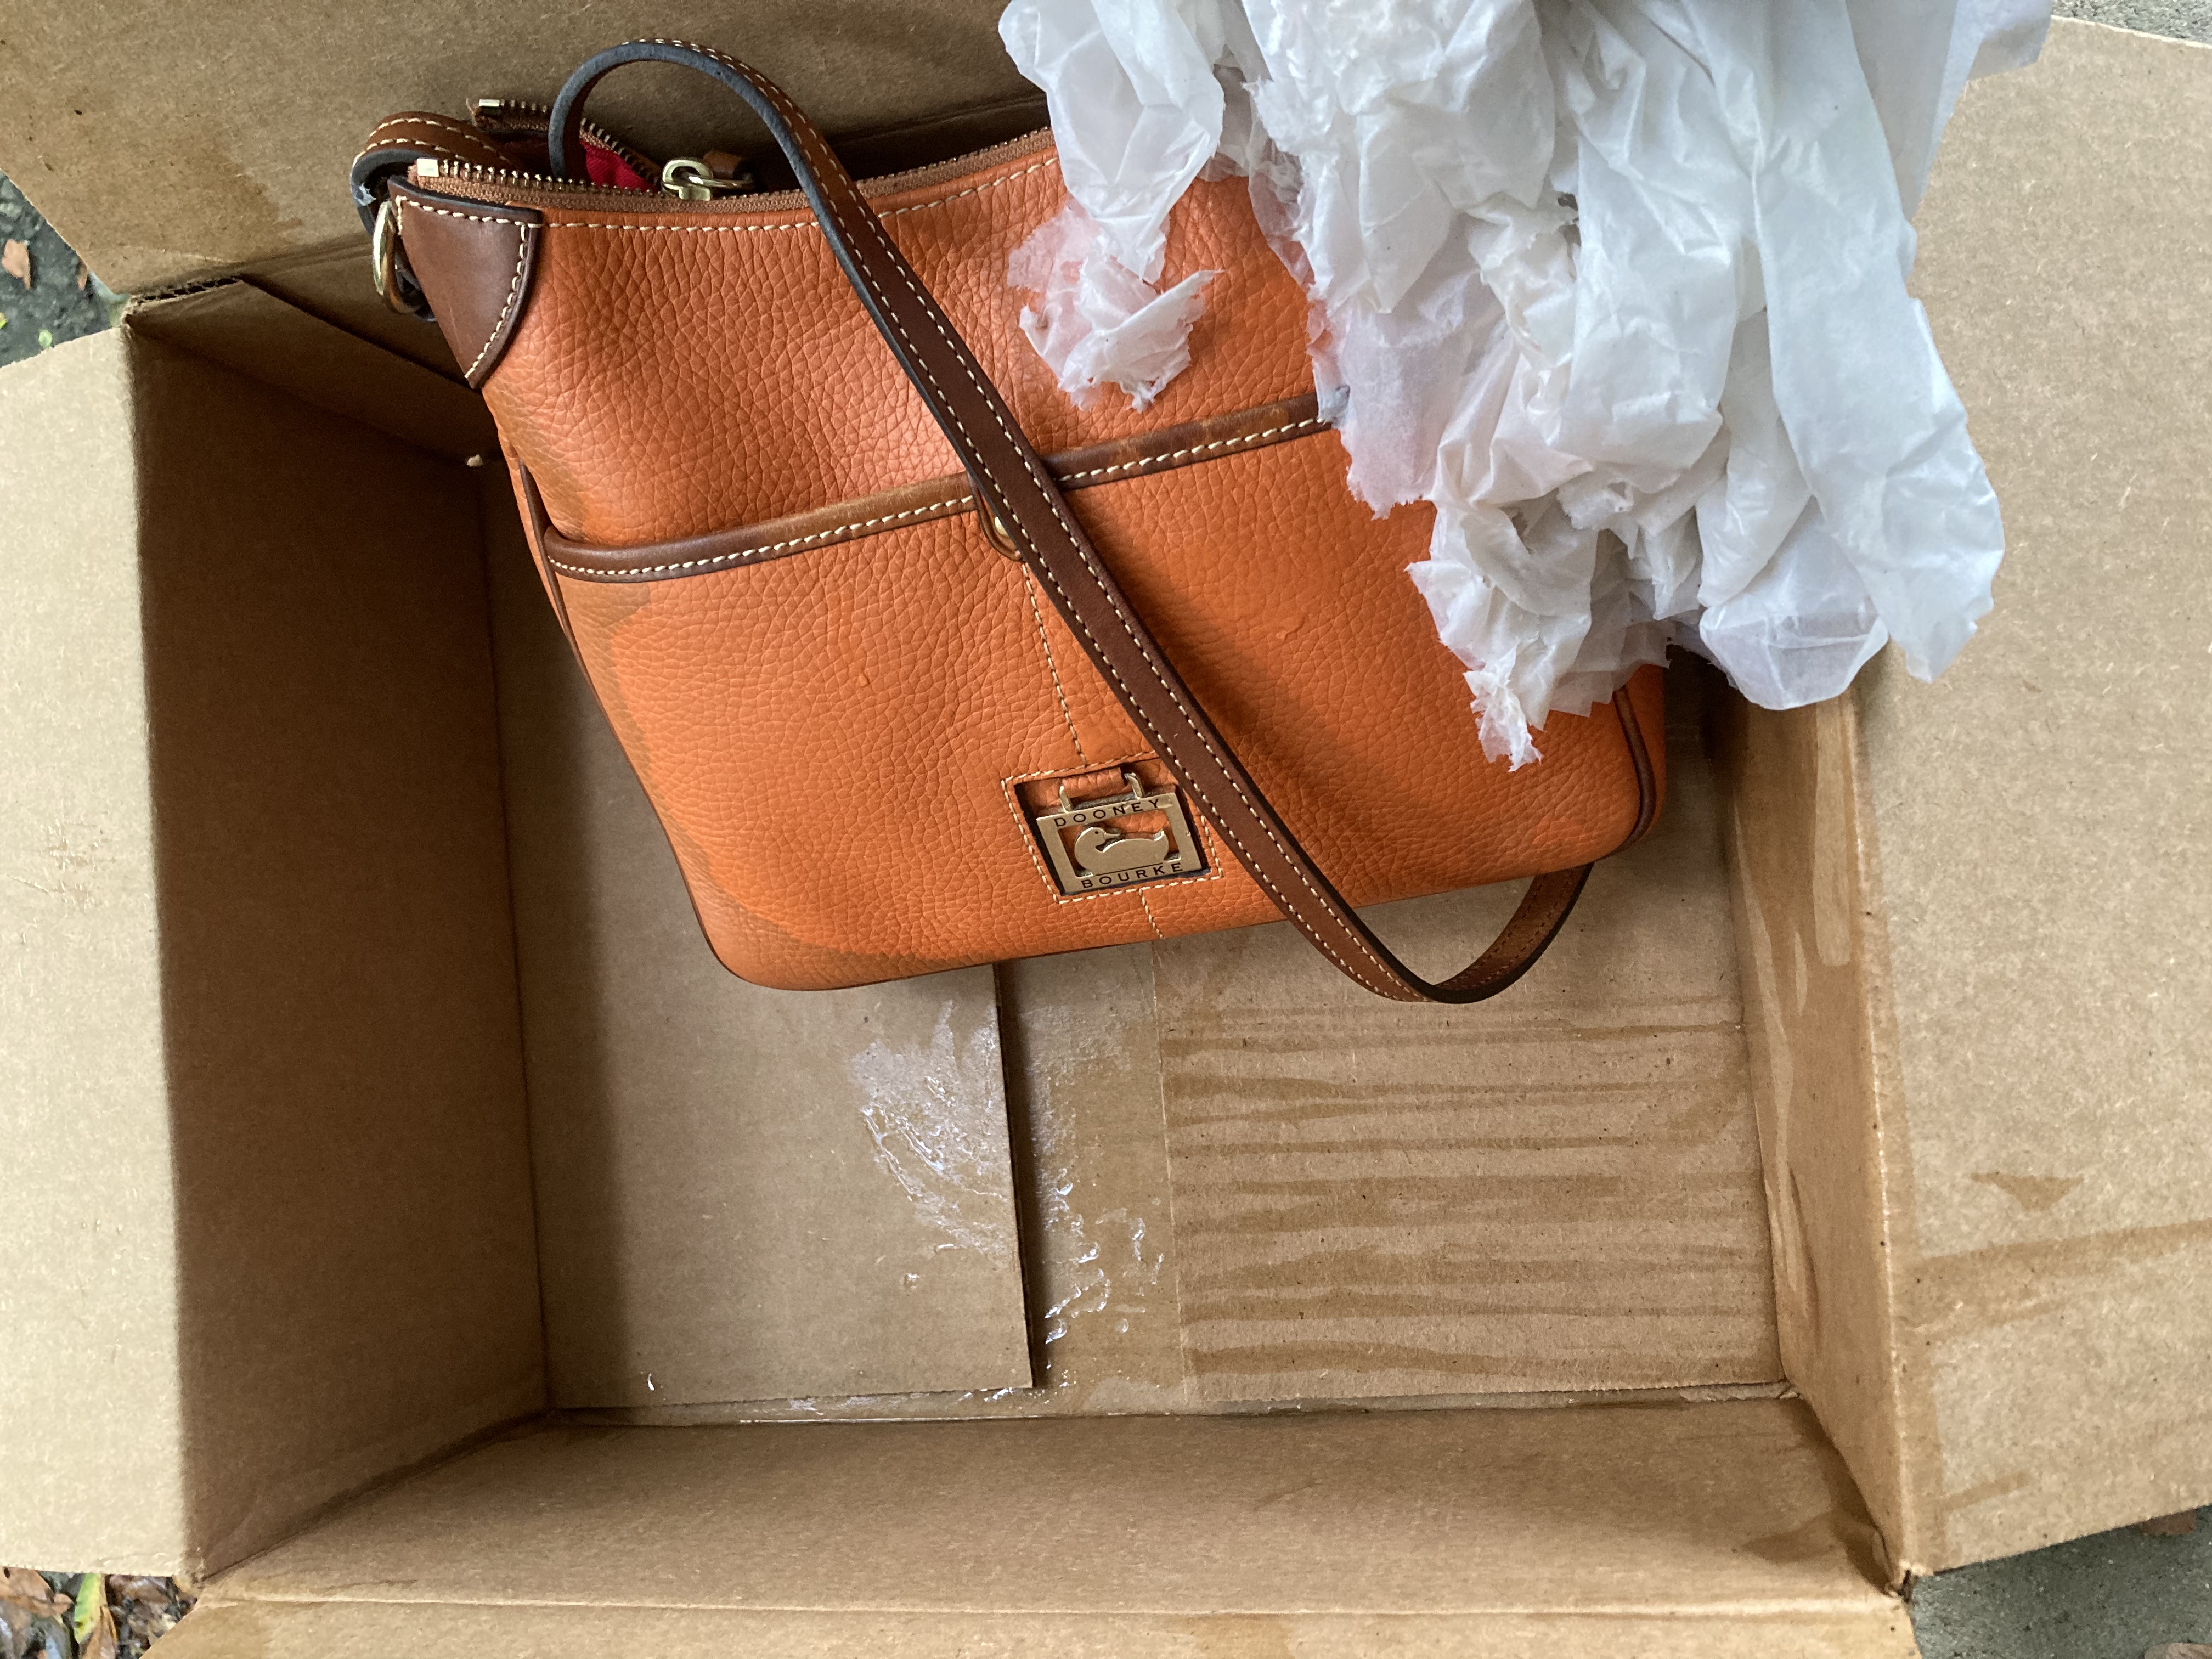 Win a Dooney & Bourke Saffiano Hadley Tote! US ends 11/21 - Mom Does Reviews